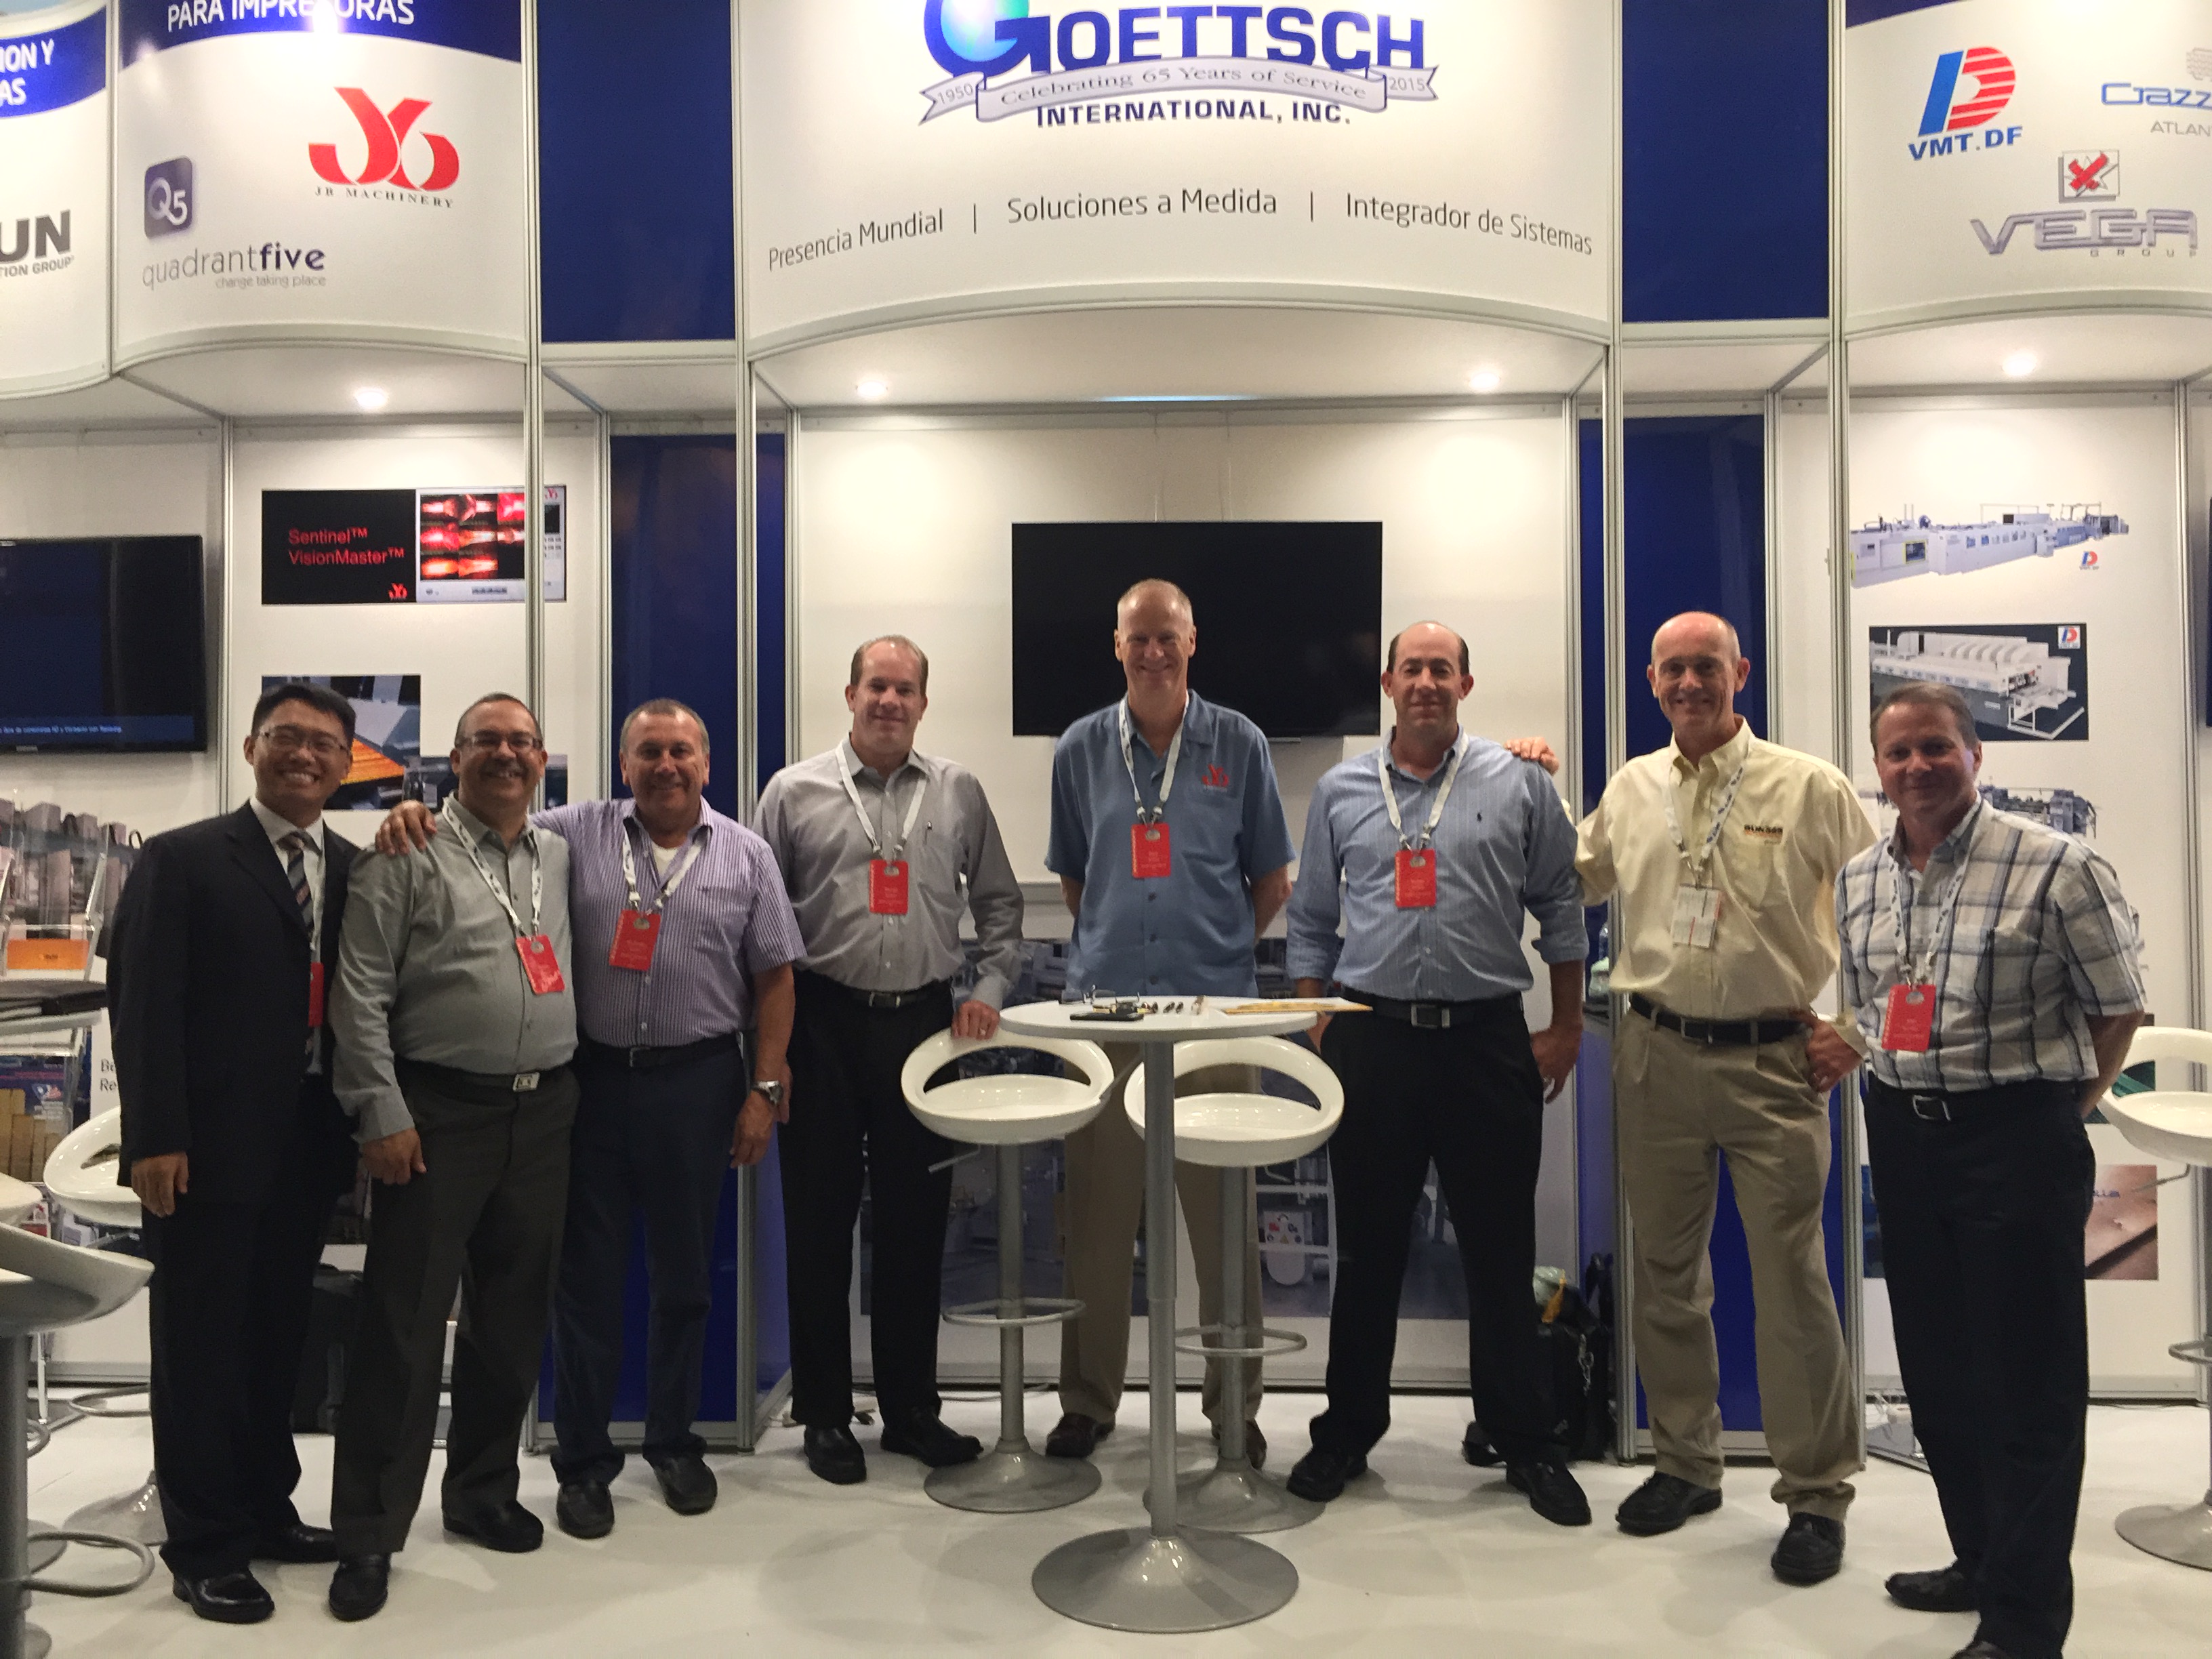 Team Goettsch and Supplier Reps. at ACCCSA 2015 in Punta Cana